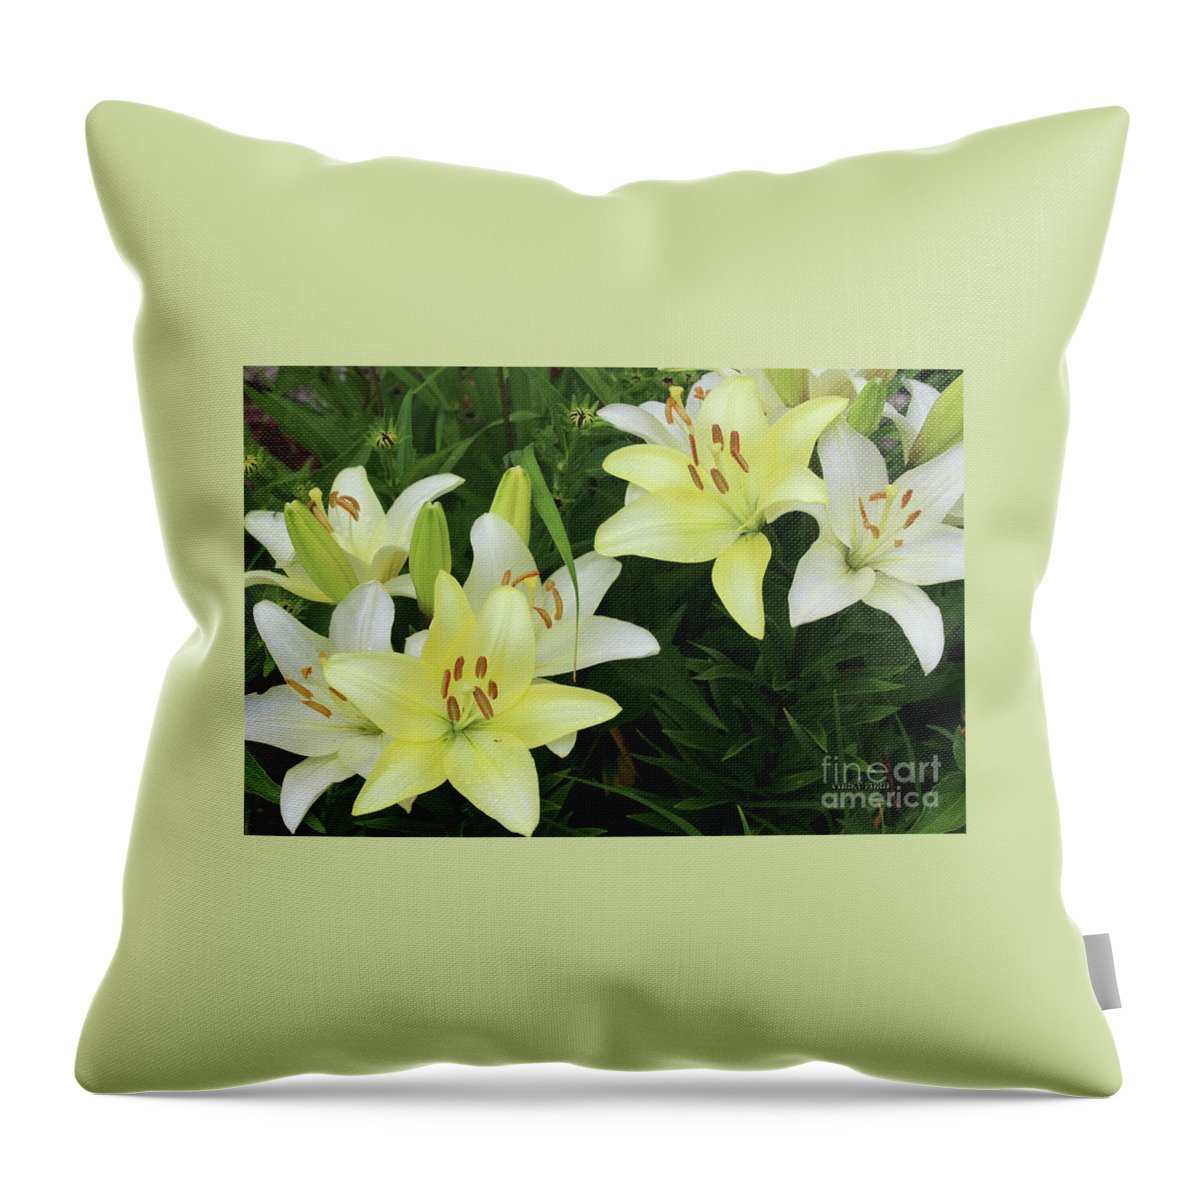 Flower Pictures Throw Pillow featuring the painting Pale Yellow Daylily Flowers by Corey Ford